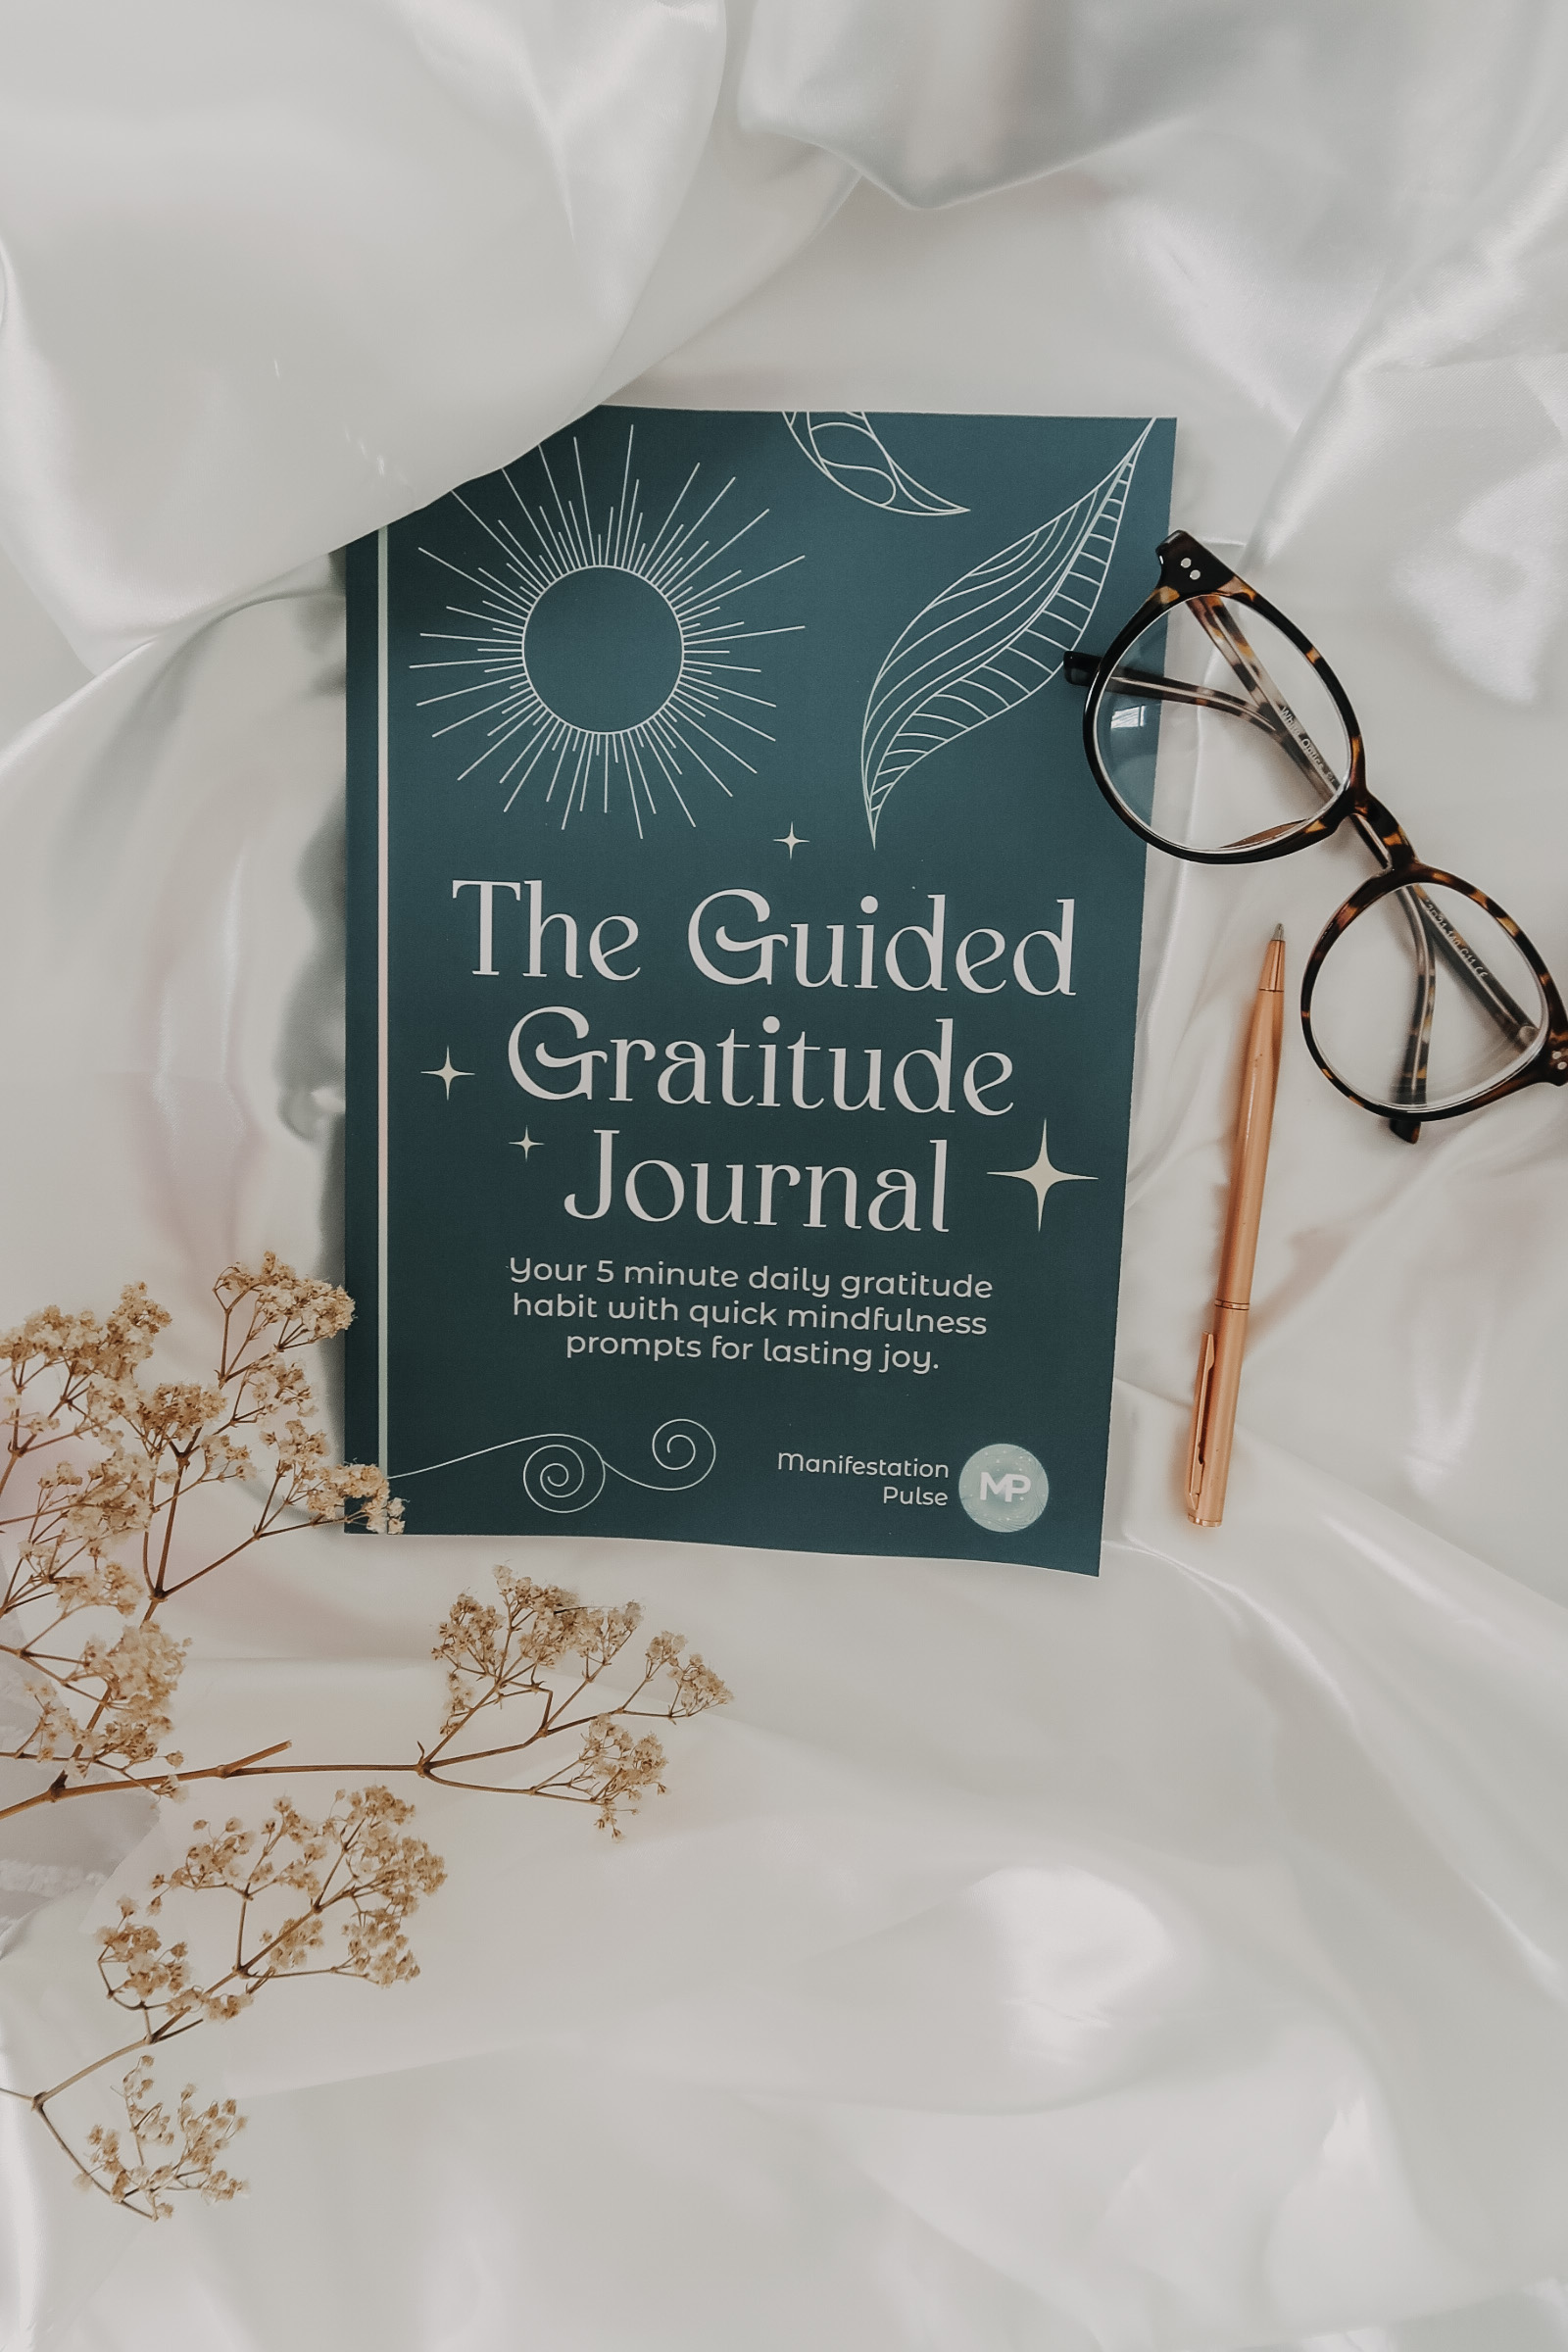 The Guided Gratitude Journal by Manifestation Pulse journal.